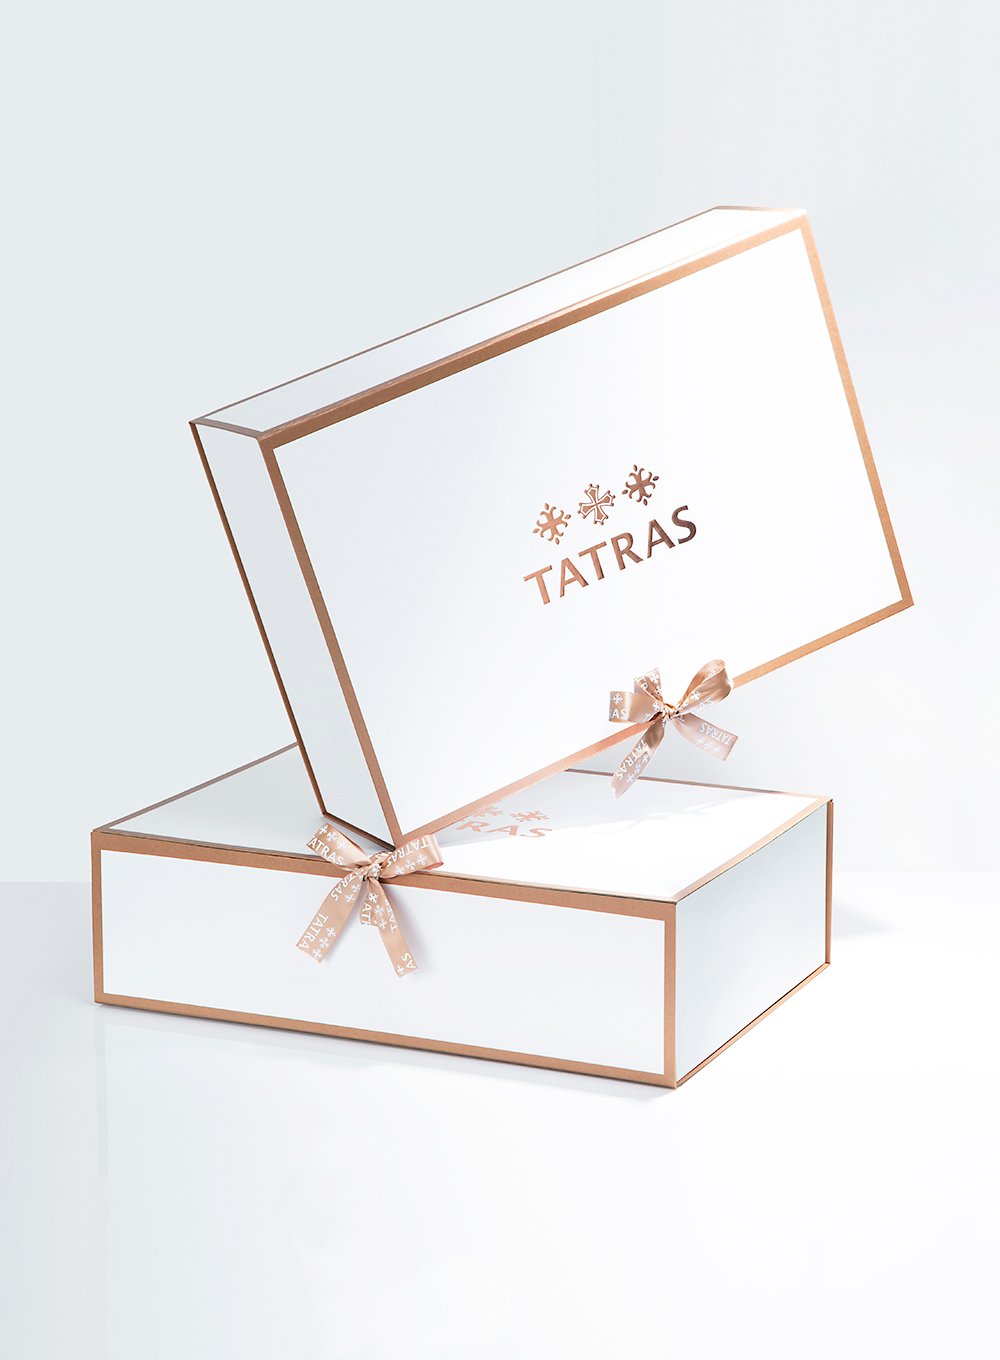 TATRAS CONCEPT STORE Special Gift Box